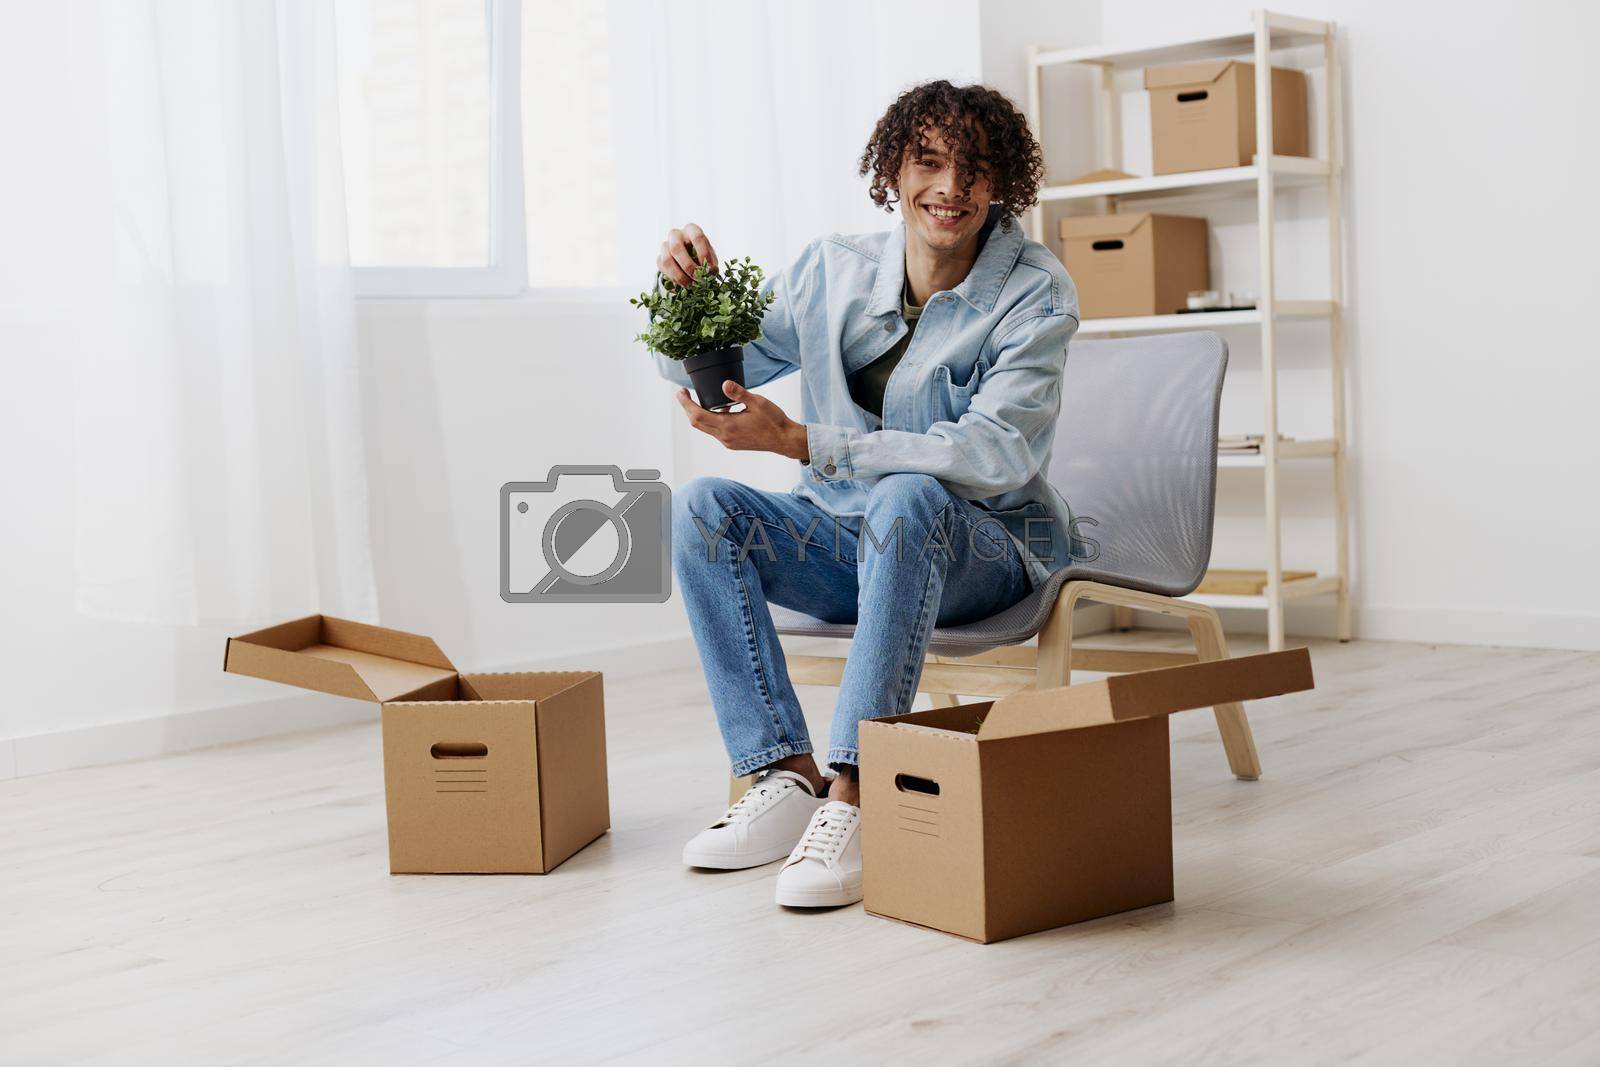 guy with curly hair cardboard boxes in the room unpacking Lifestyle. High quality photo